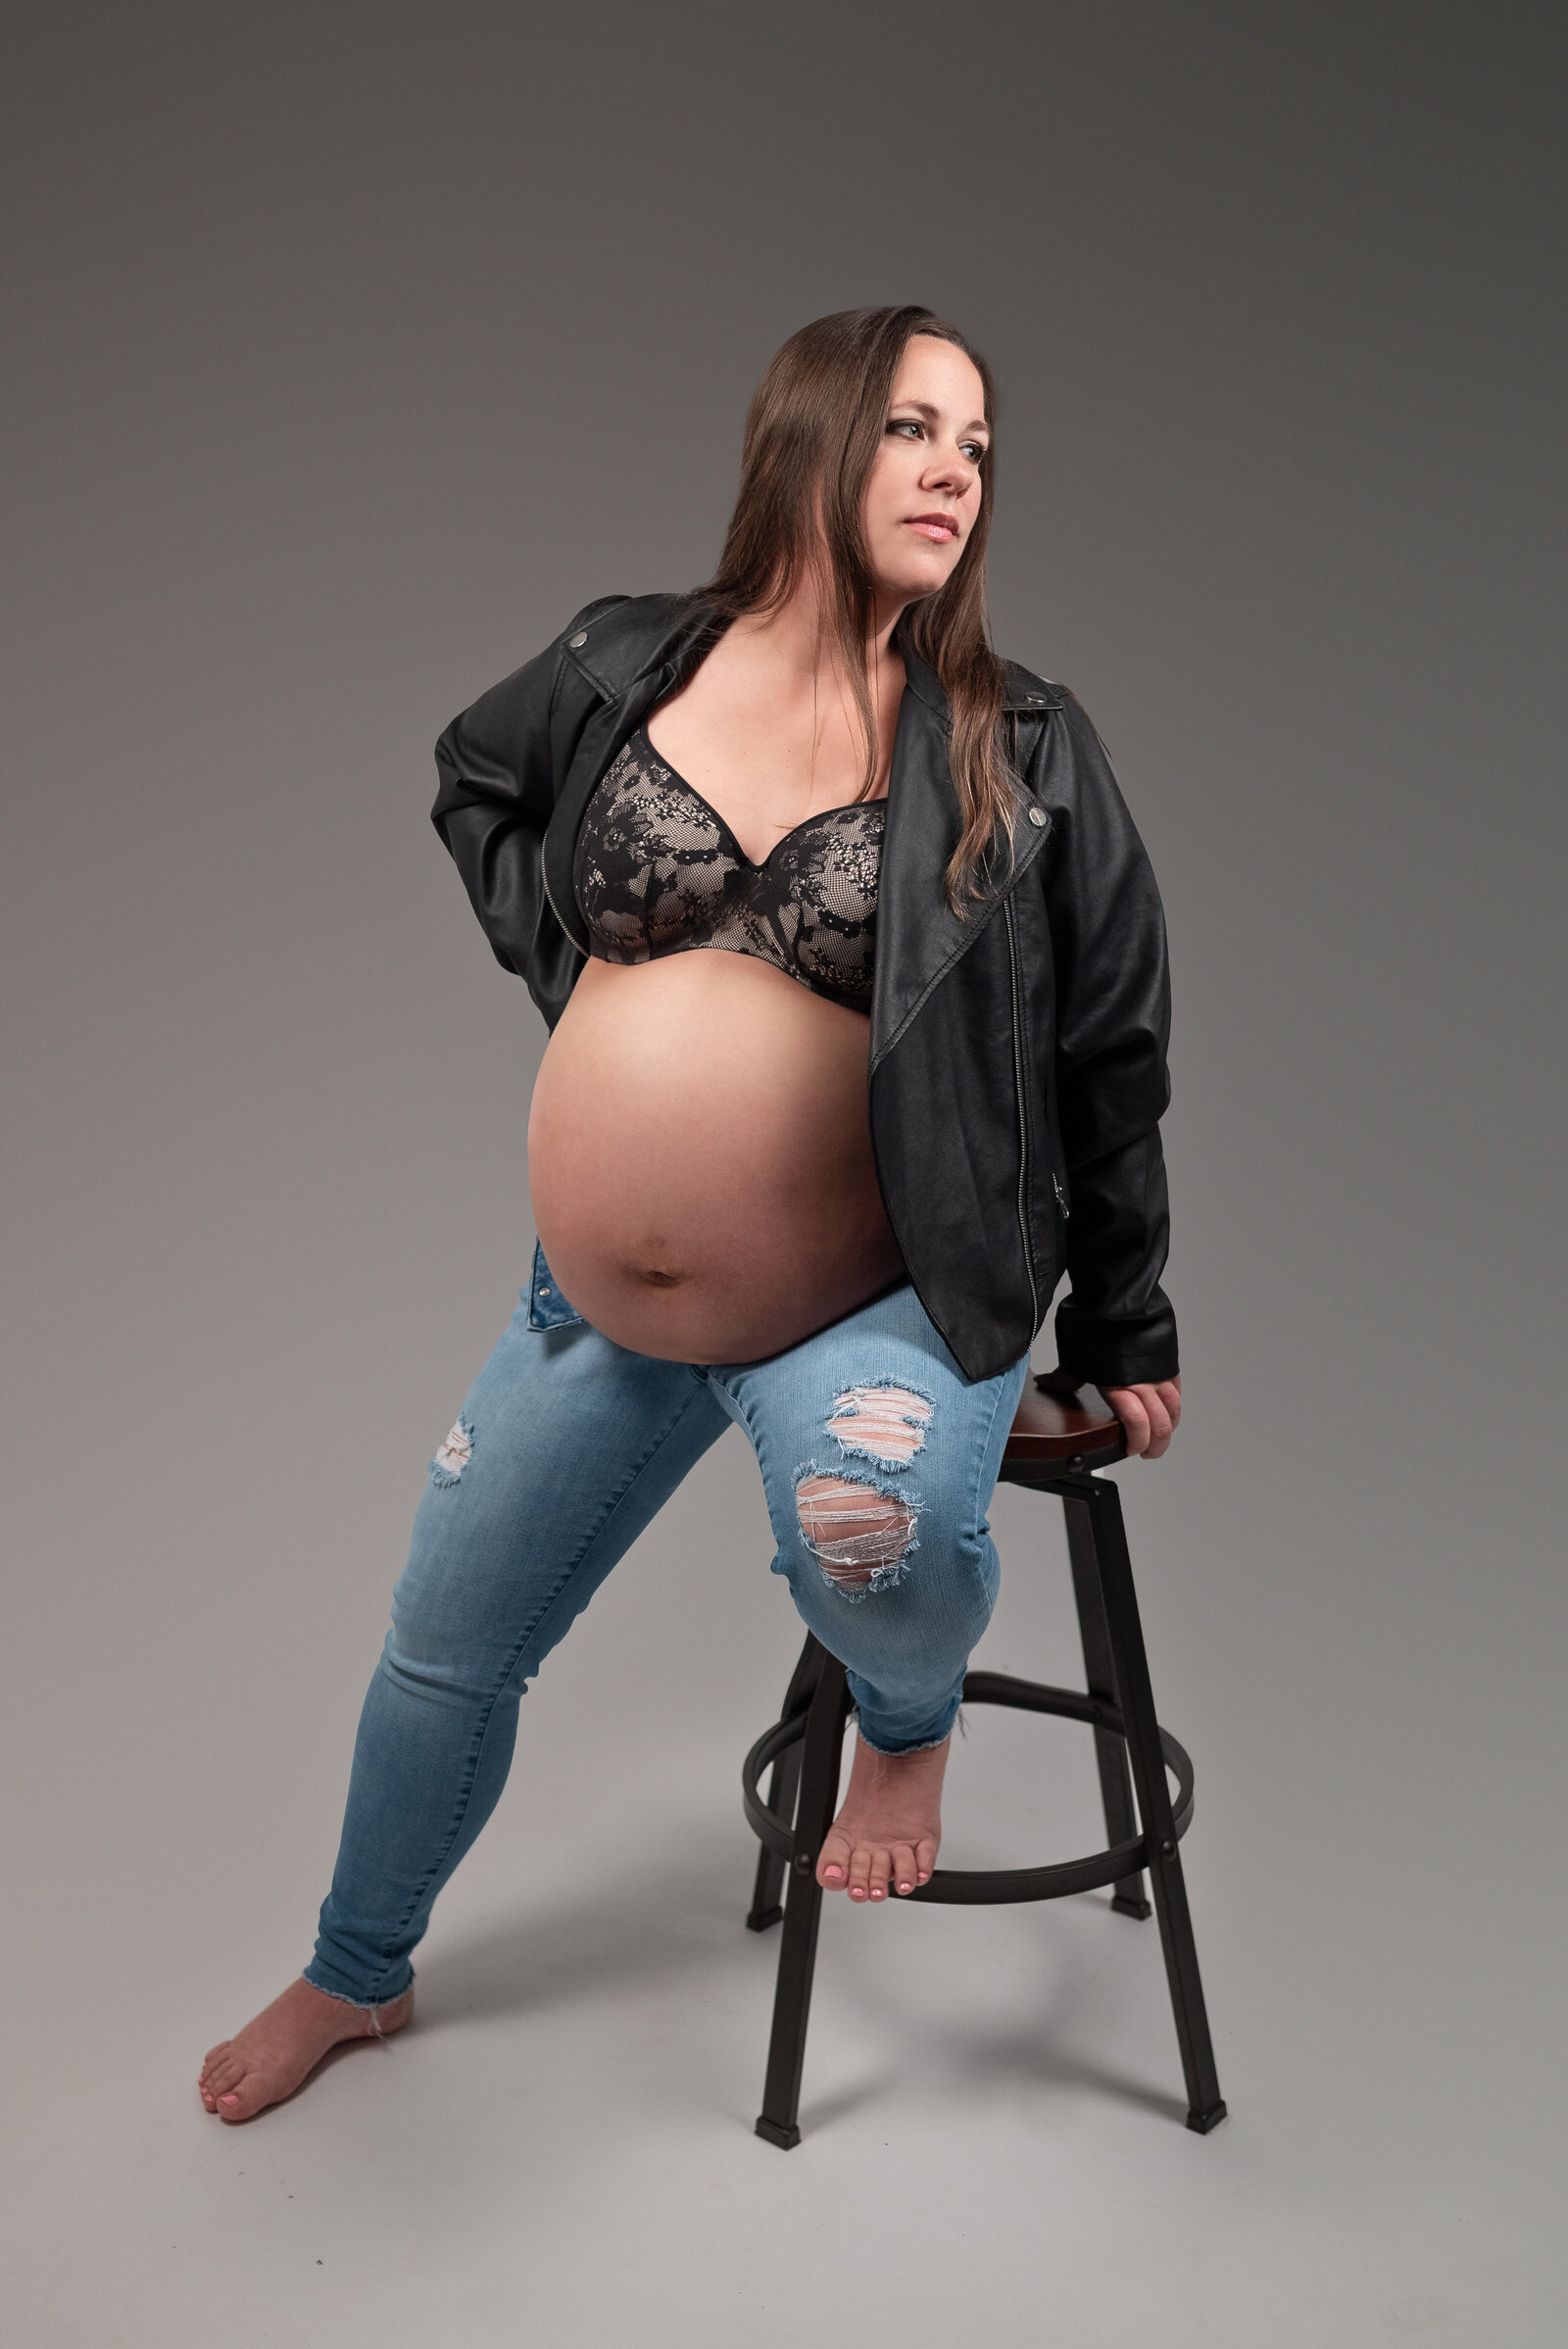 Pregnant woman  posing on a stool for her maternity photos in Huntsville Alabama